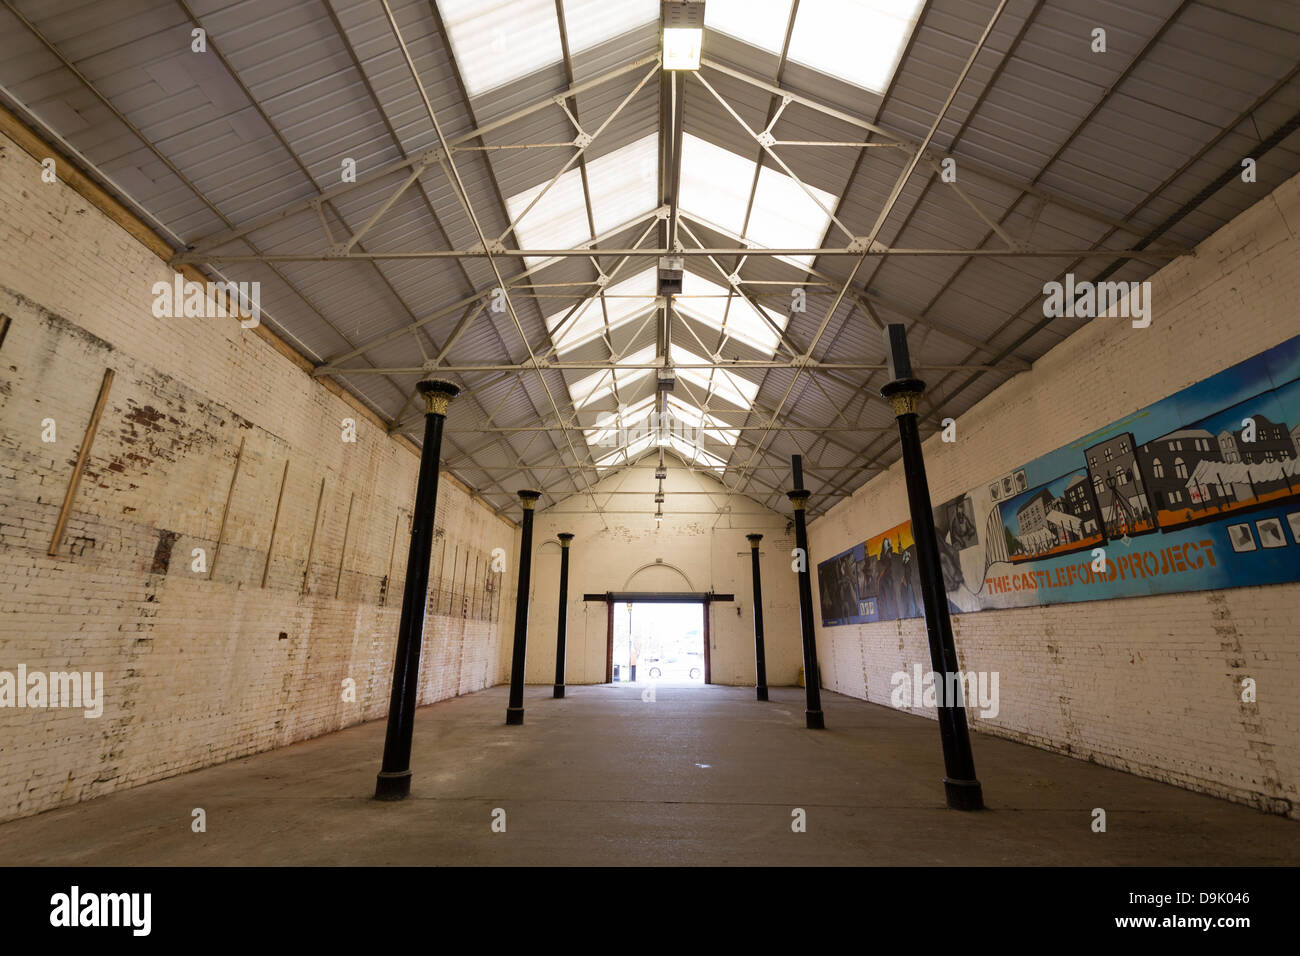 Castleford Market Hall, opened 1880, interior view. Stock Photo